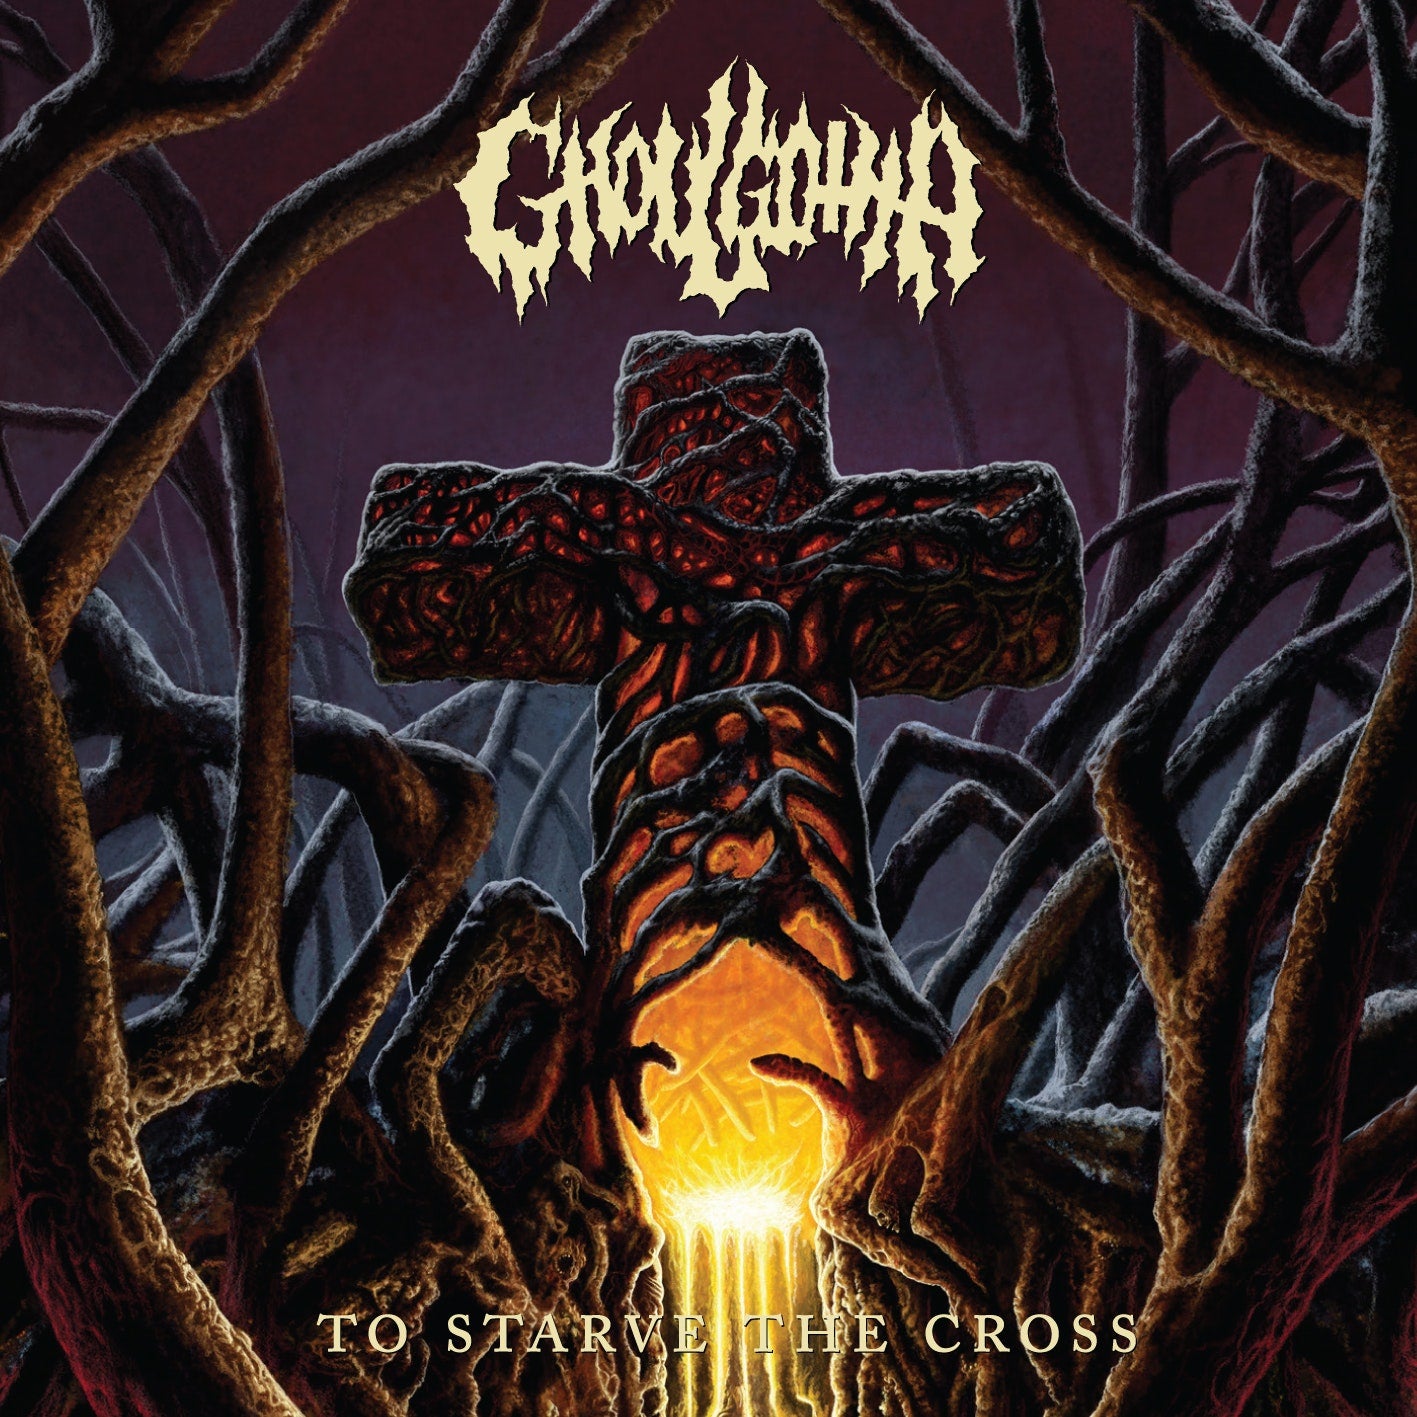 ghoulgotha to starve cover art